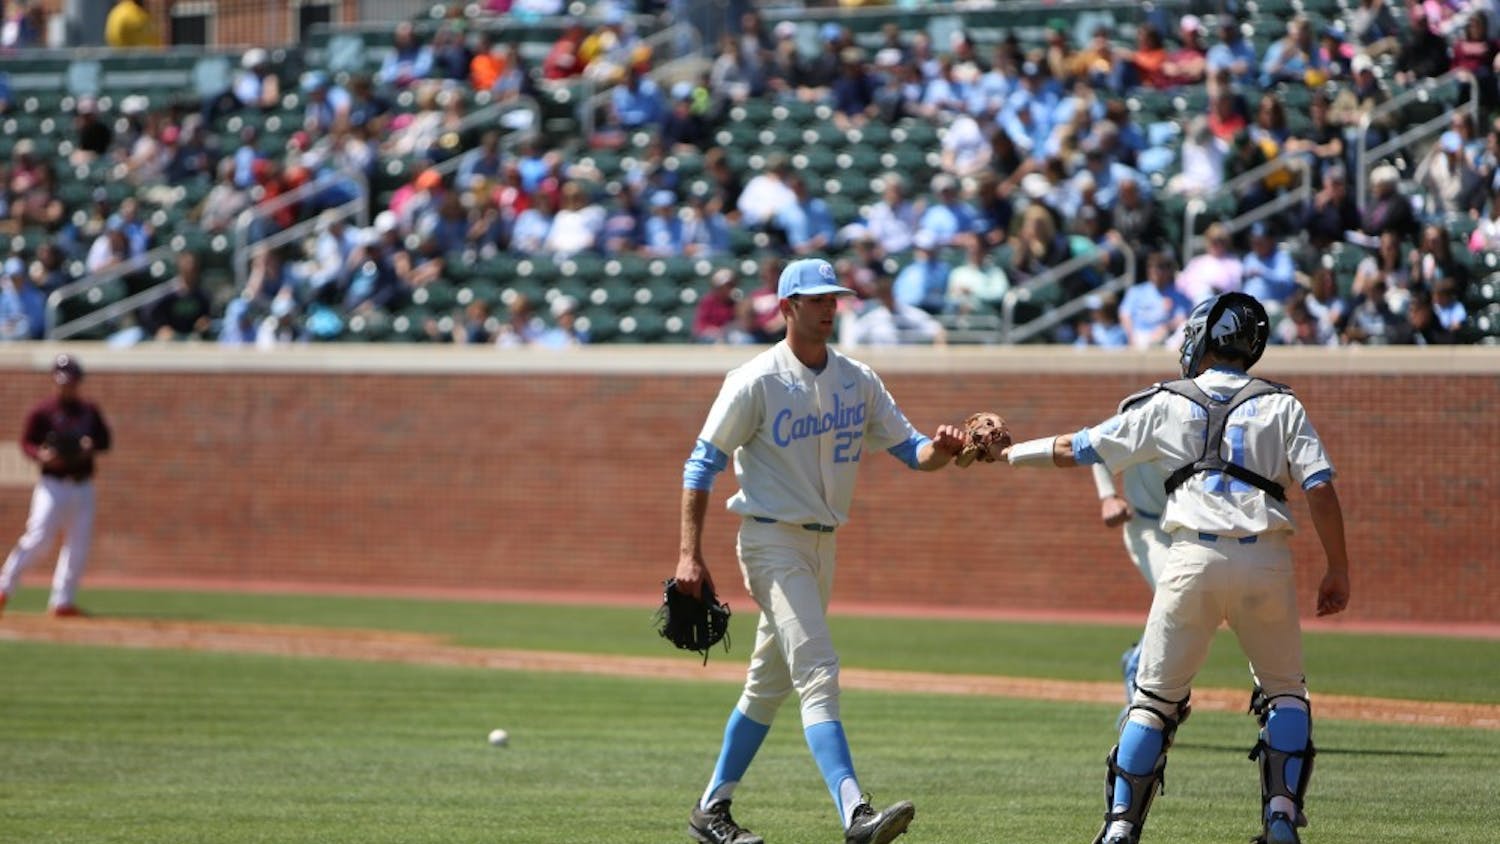 The UNC baseball team took on Virginia Tech in a three game series over the weekend at Boshamer Stadium.